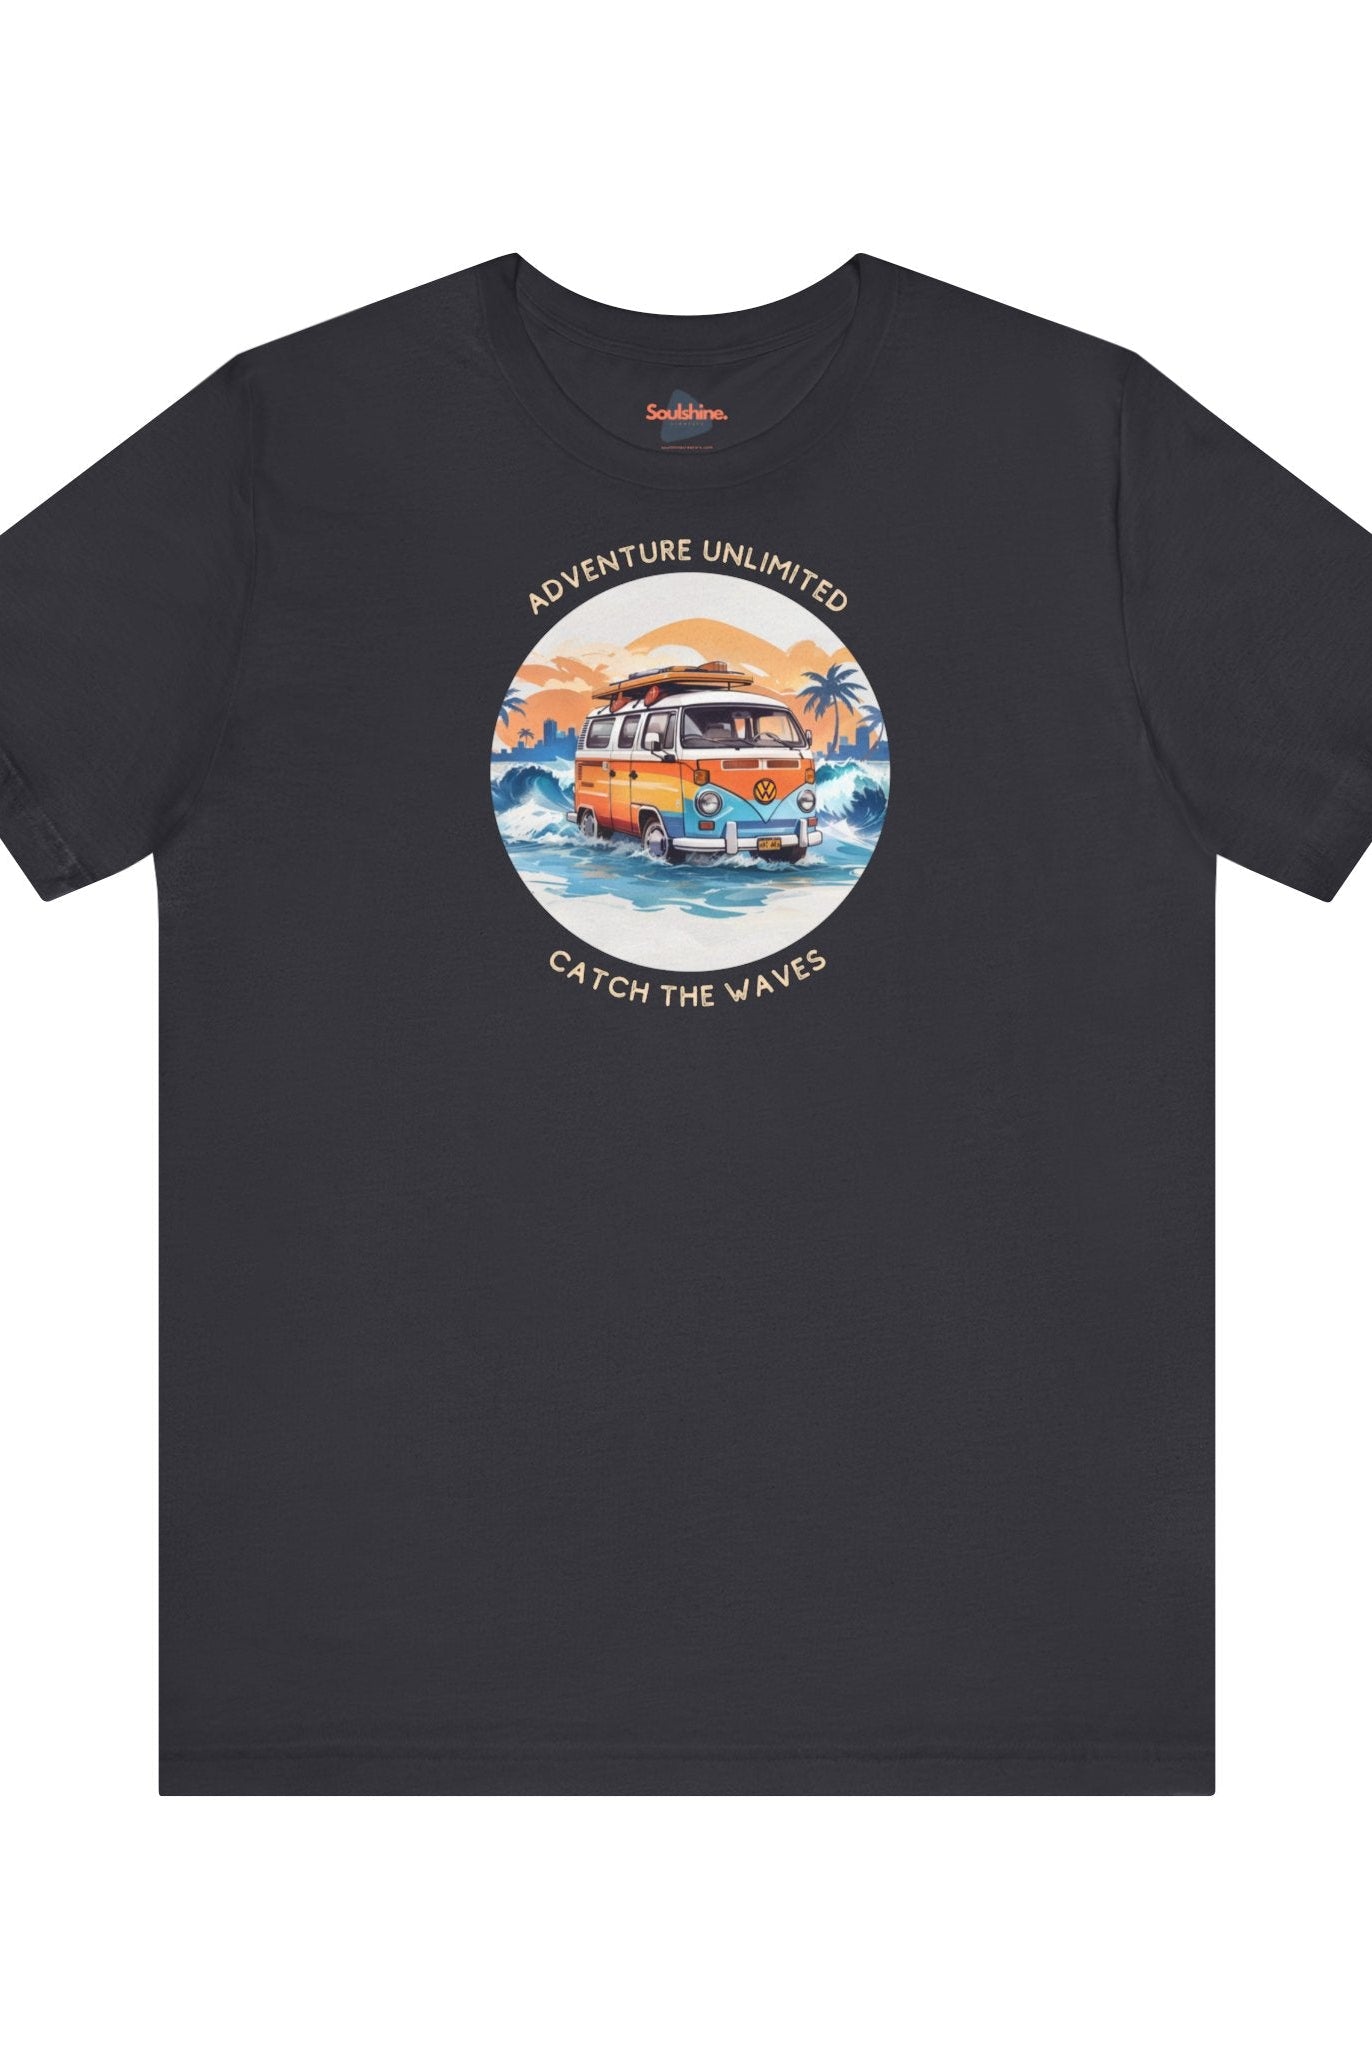 Adventure Unlimited Surfing T-Shirt by Soulshinecreators - Bella & Canvas printed black tee with ’s the answer slogan - direct-to-garment itemfrom EU